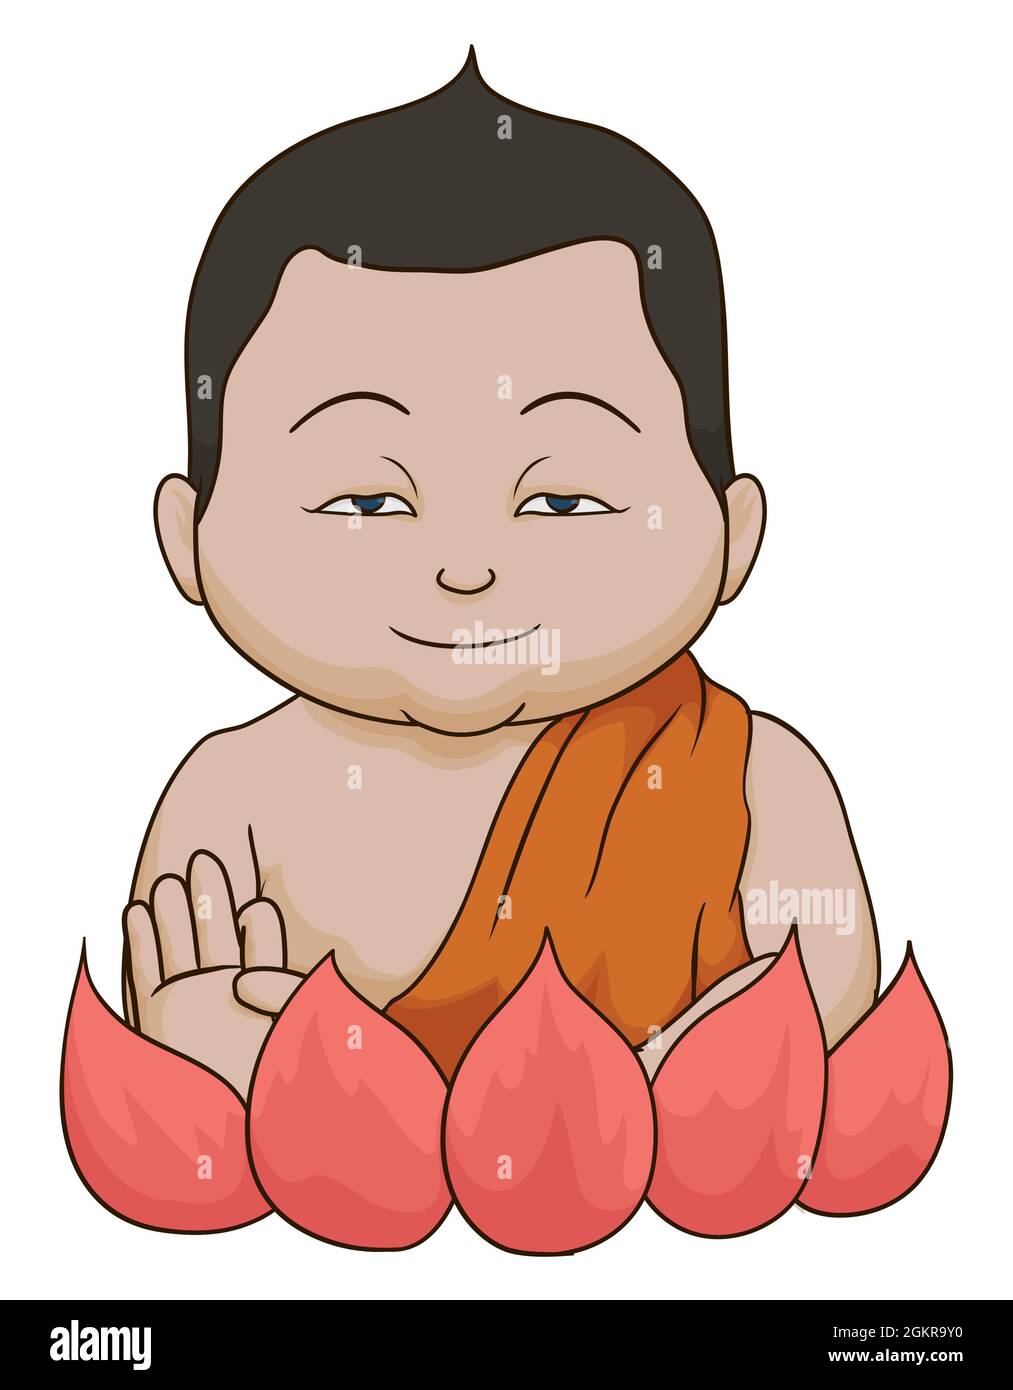 Young Buddha with Mudrakhya gesture in his hand and half-open eyes in cartoon style. Stock Vector